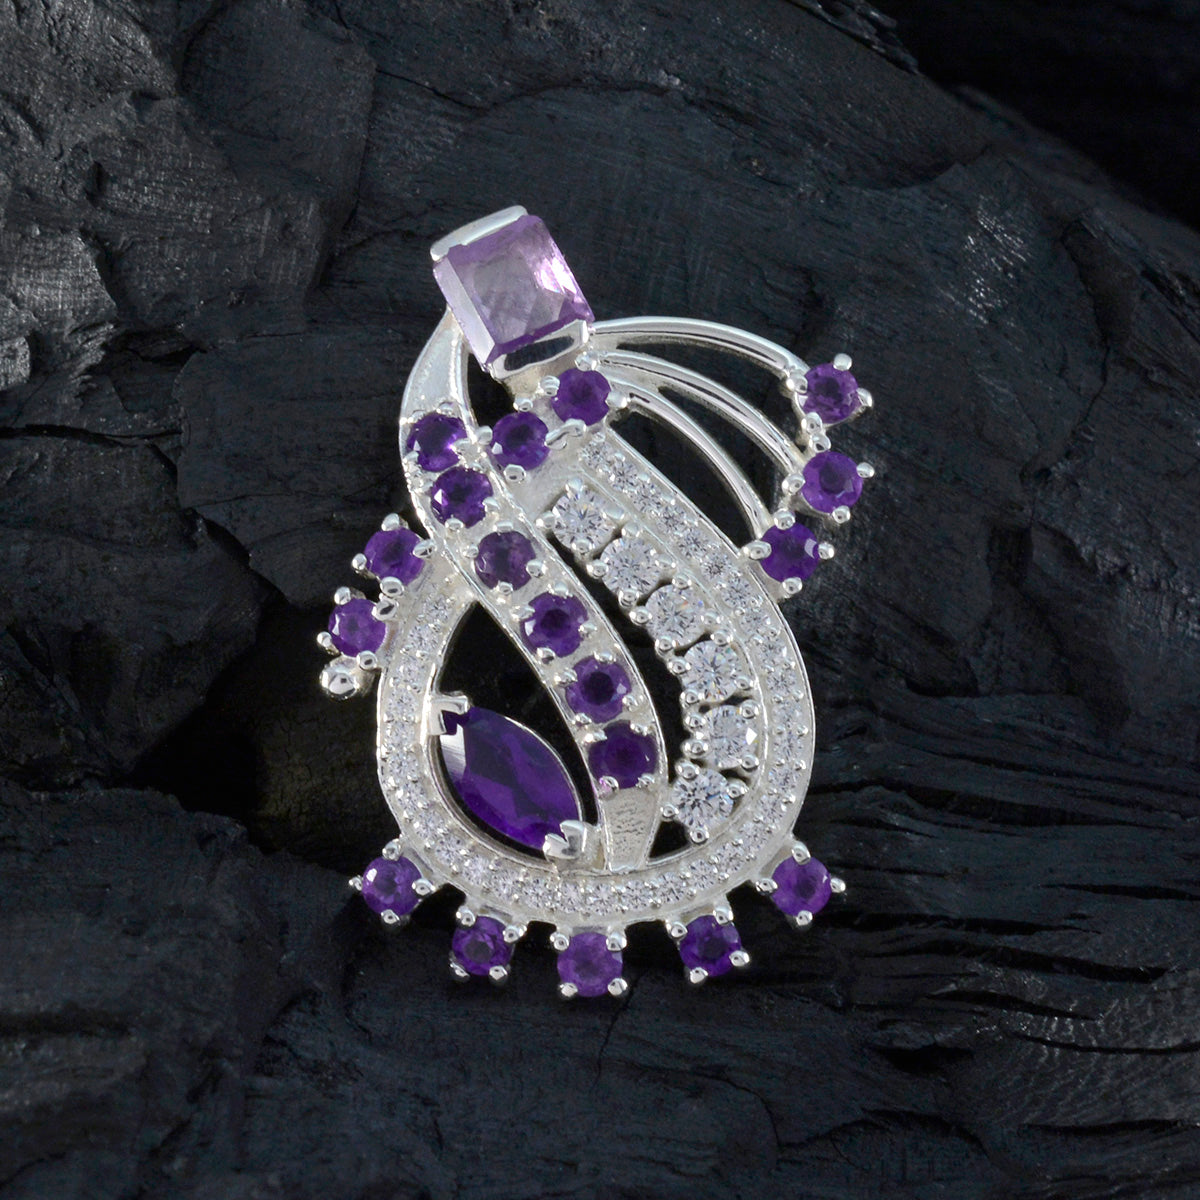 Riyo Winsome Gemstone Multi Faceted Purple Amethyst Sterling Silver Pendant Gift For Friend